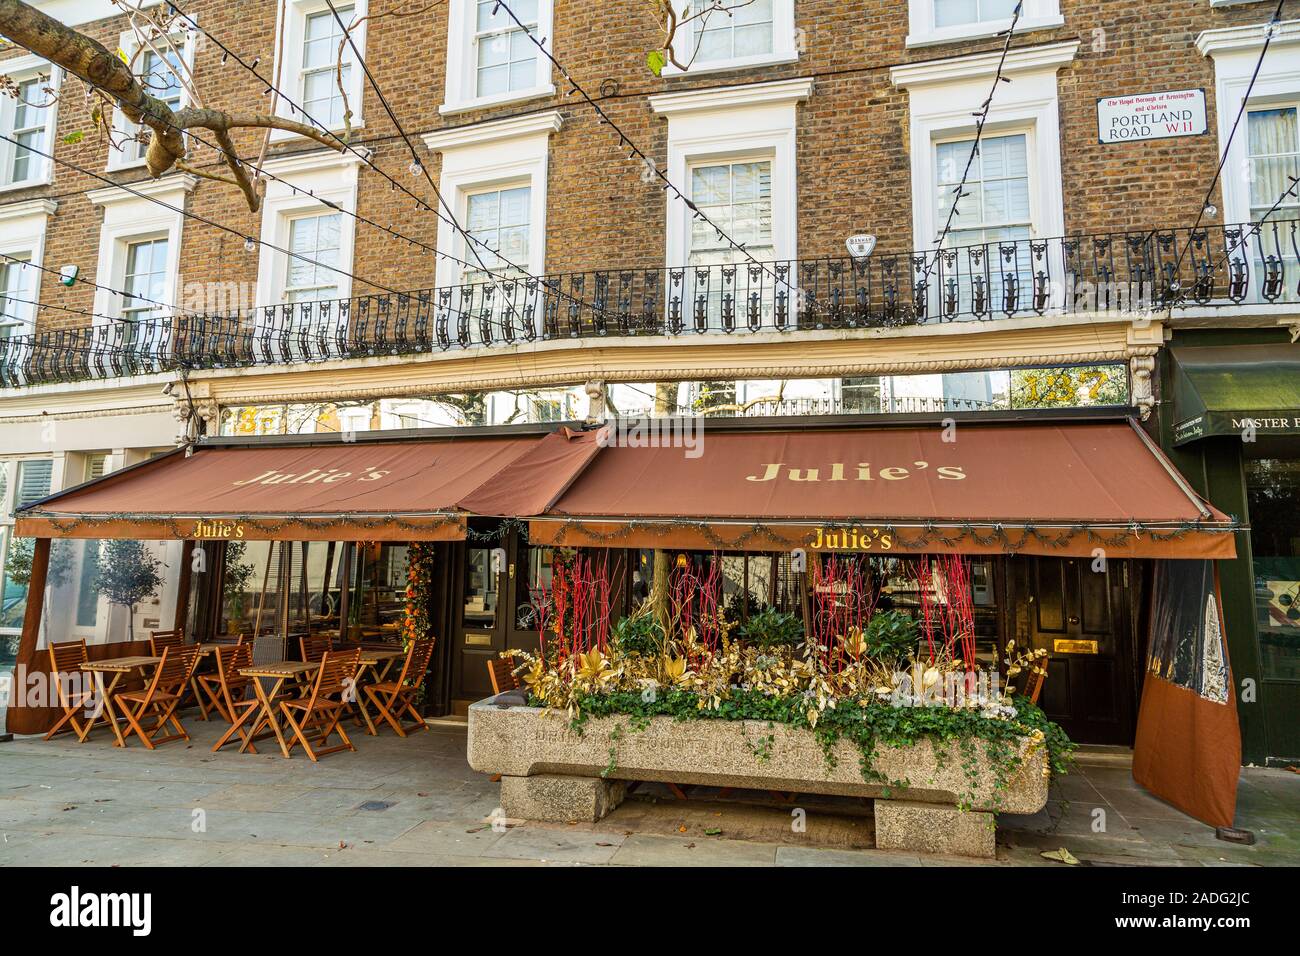 Julie's restaurant and bar, long time hang out for A-List celebrities, rock stars, royalty amid posh neighbourhood of Notting Hill London UK Stock Photo